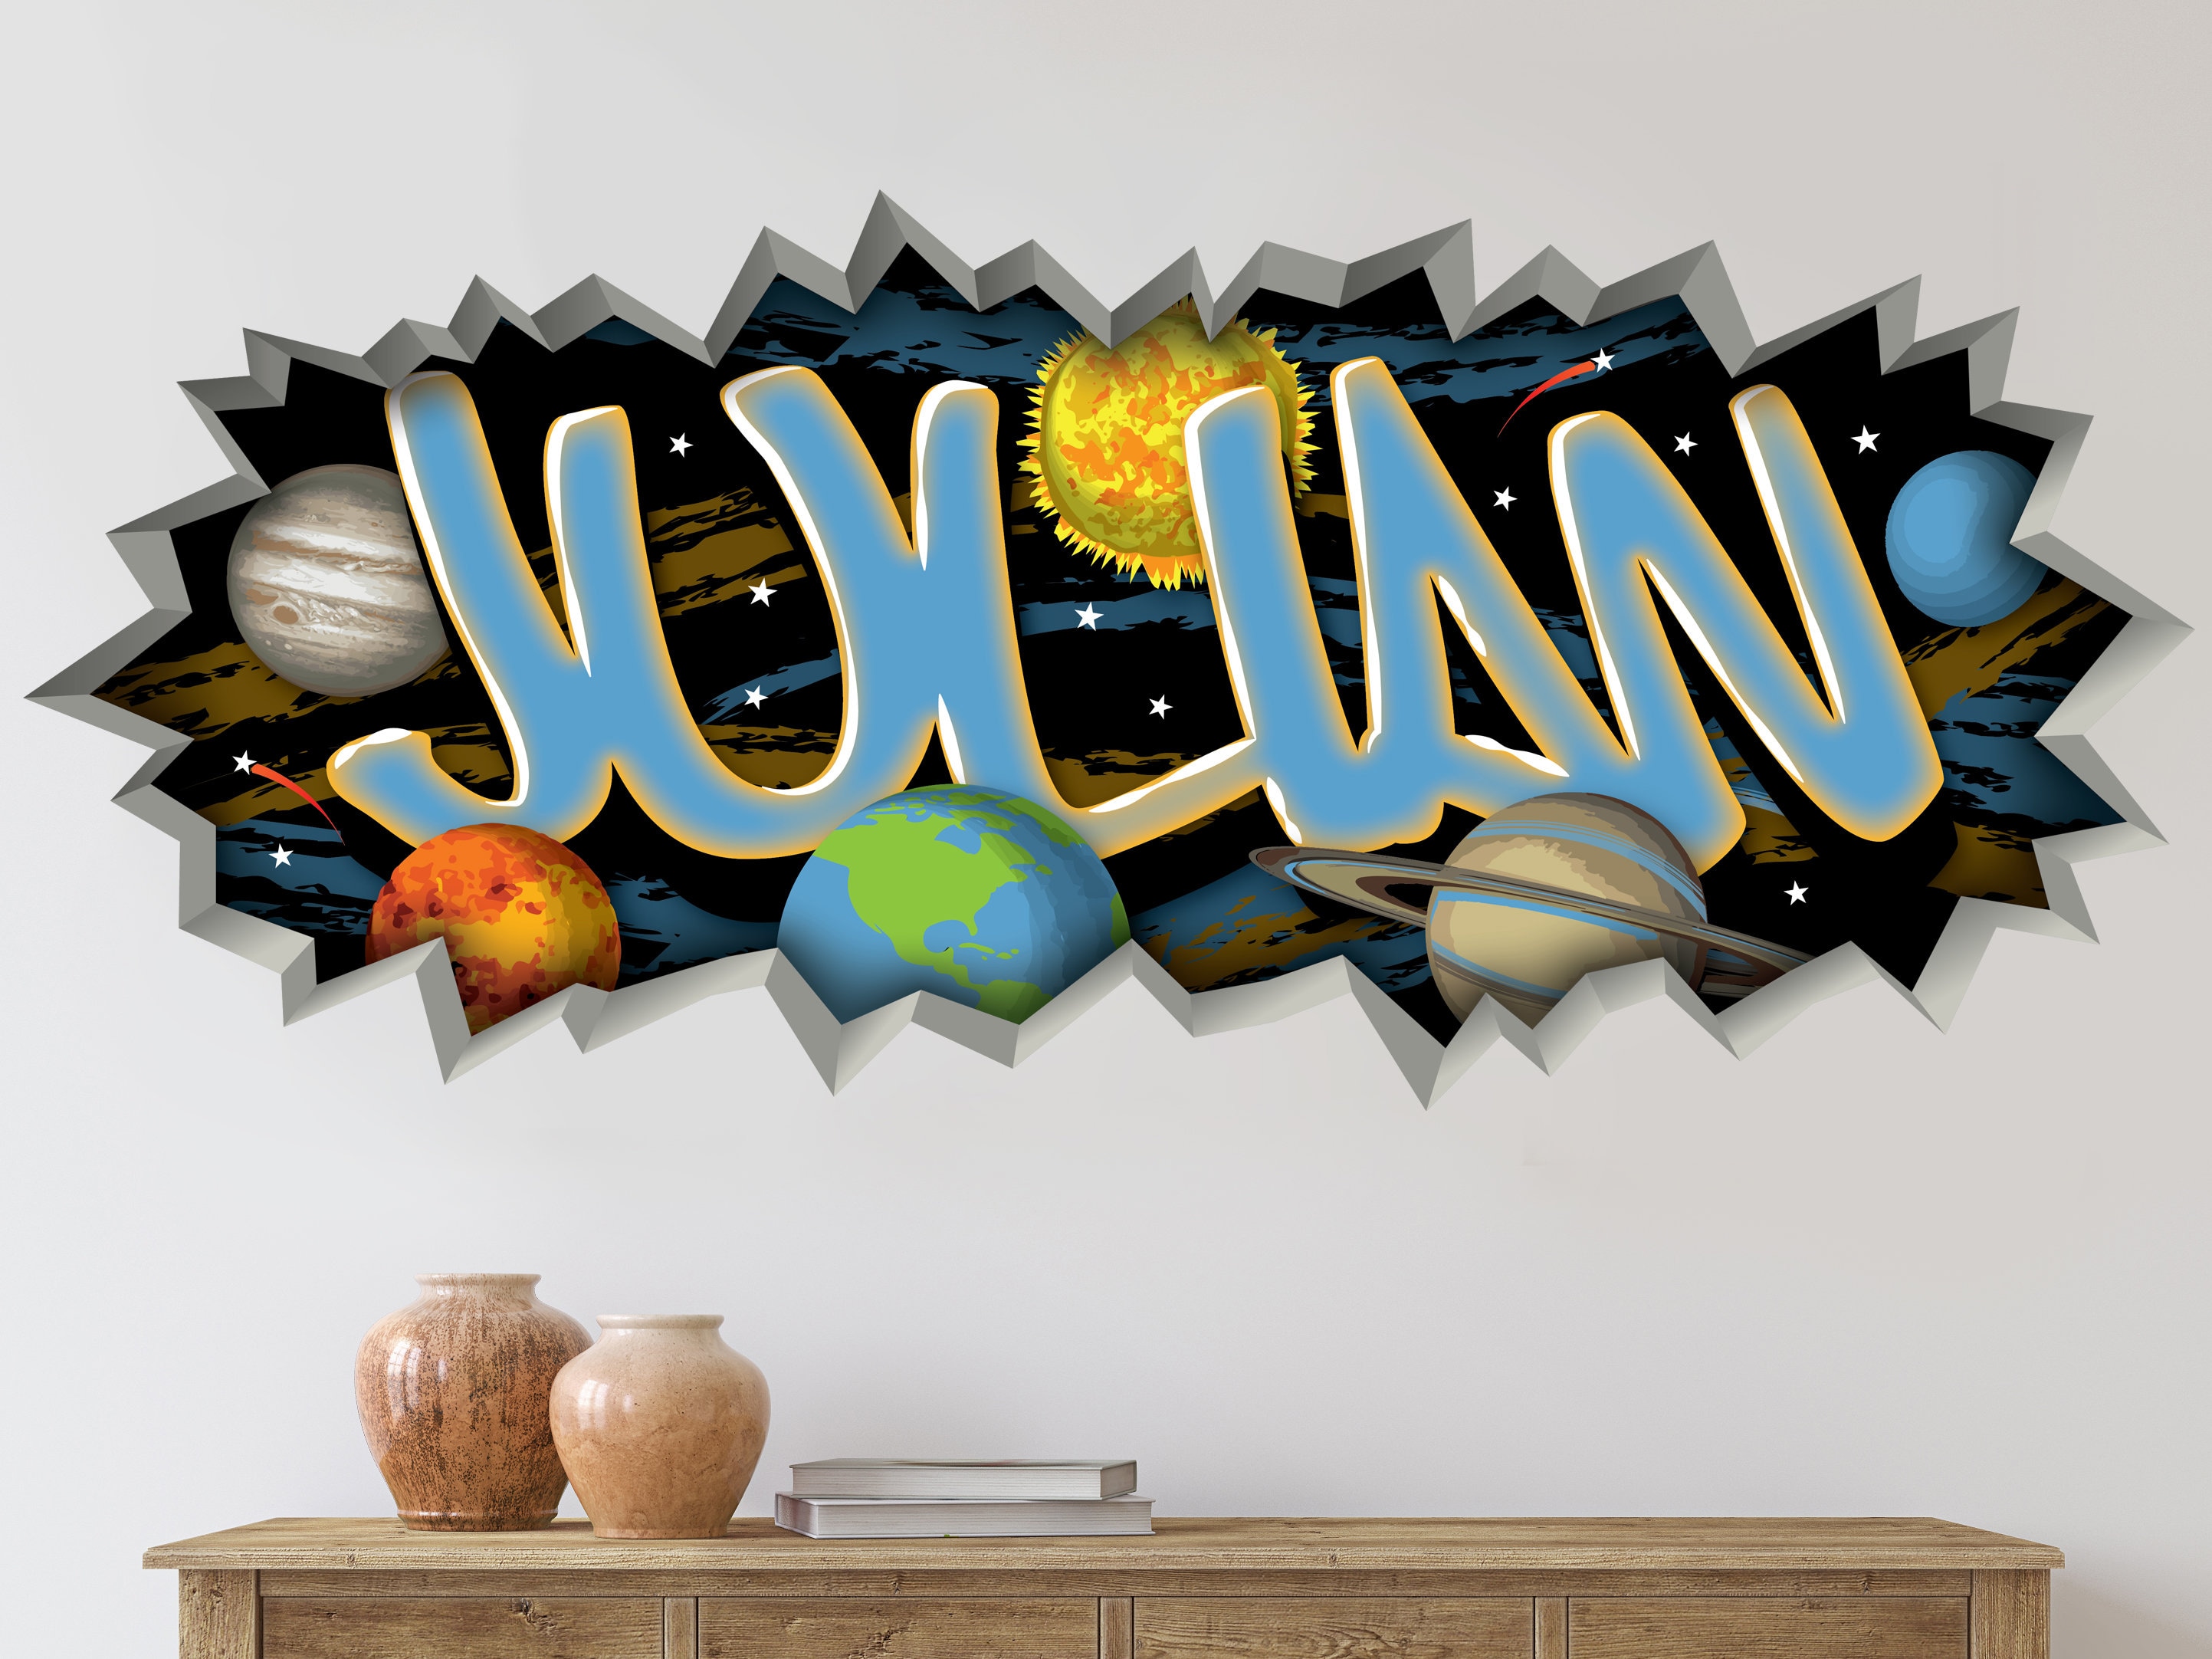 3D Galaxy Blue Cosmic Milky Way Wall Stickers, HOLENGS Outer Space Planets  Simulation Crack Hole Wall Decals, Starry Sky Wall Decor for Boys Kids